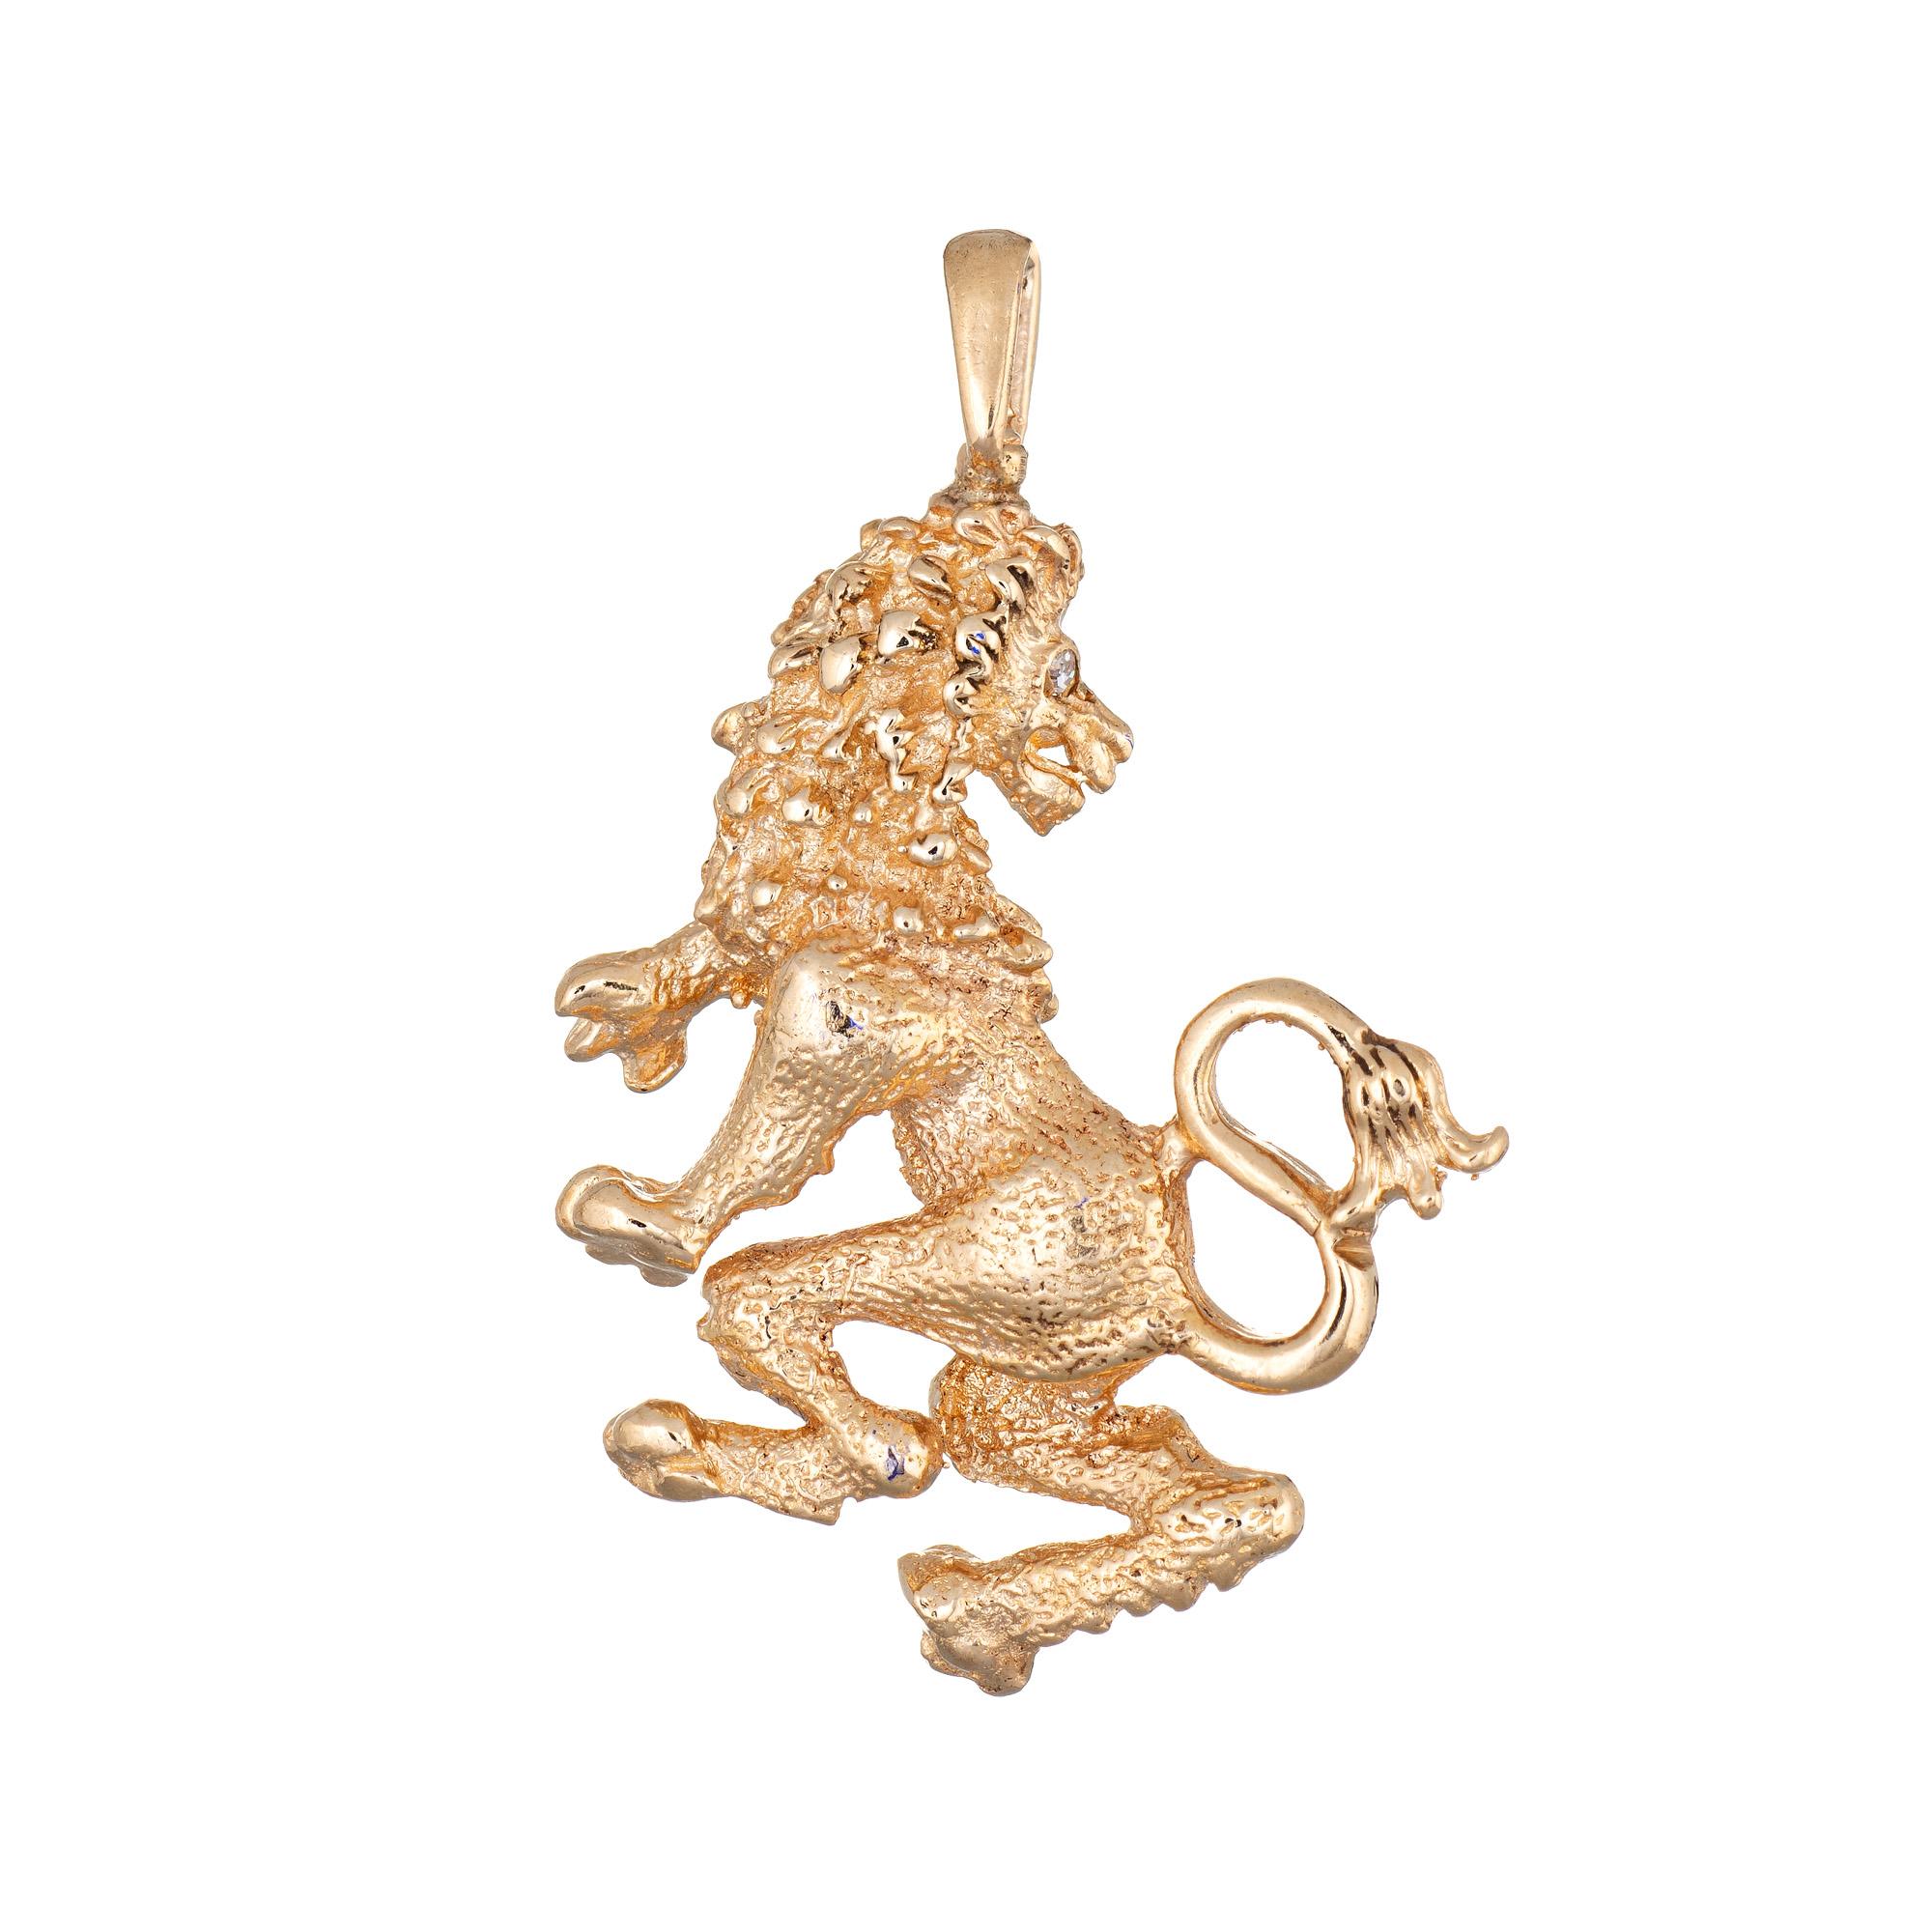 Finely detailed vintage Lion pendant (or charm) crafted in 14k yellow gold.  

One estimated 0.01 carat single cut diamonds is set into the eye (estimated at H-I color and VS2 clarity).

The nicely detailed pendant features a Lion in standing pose